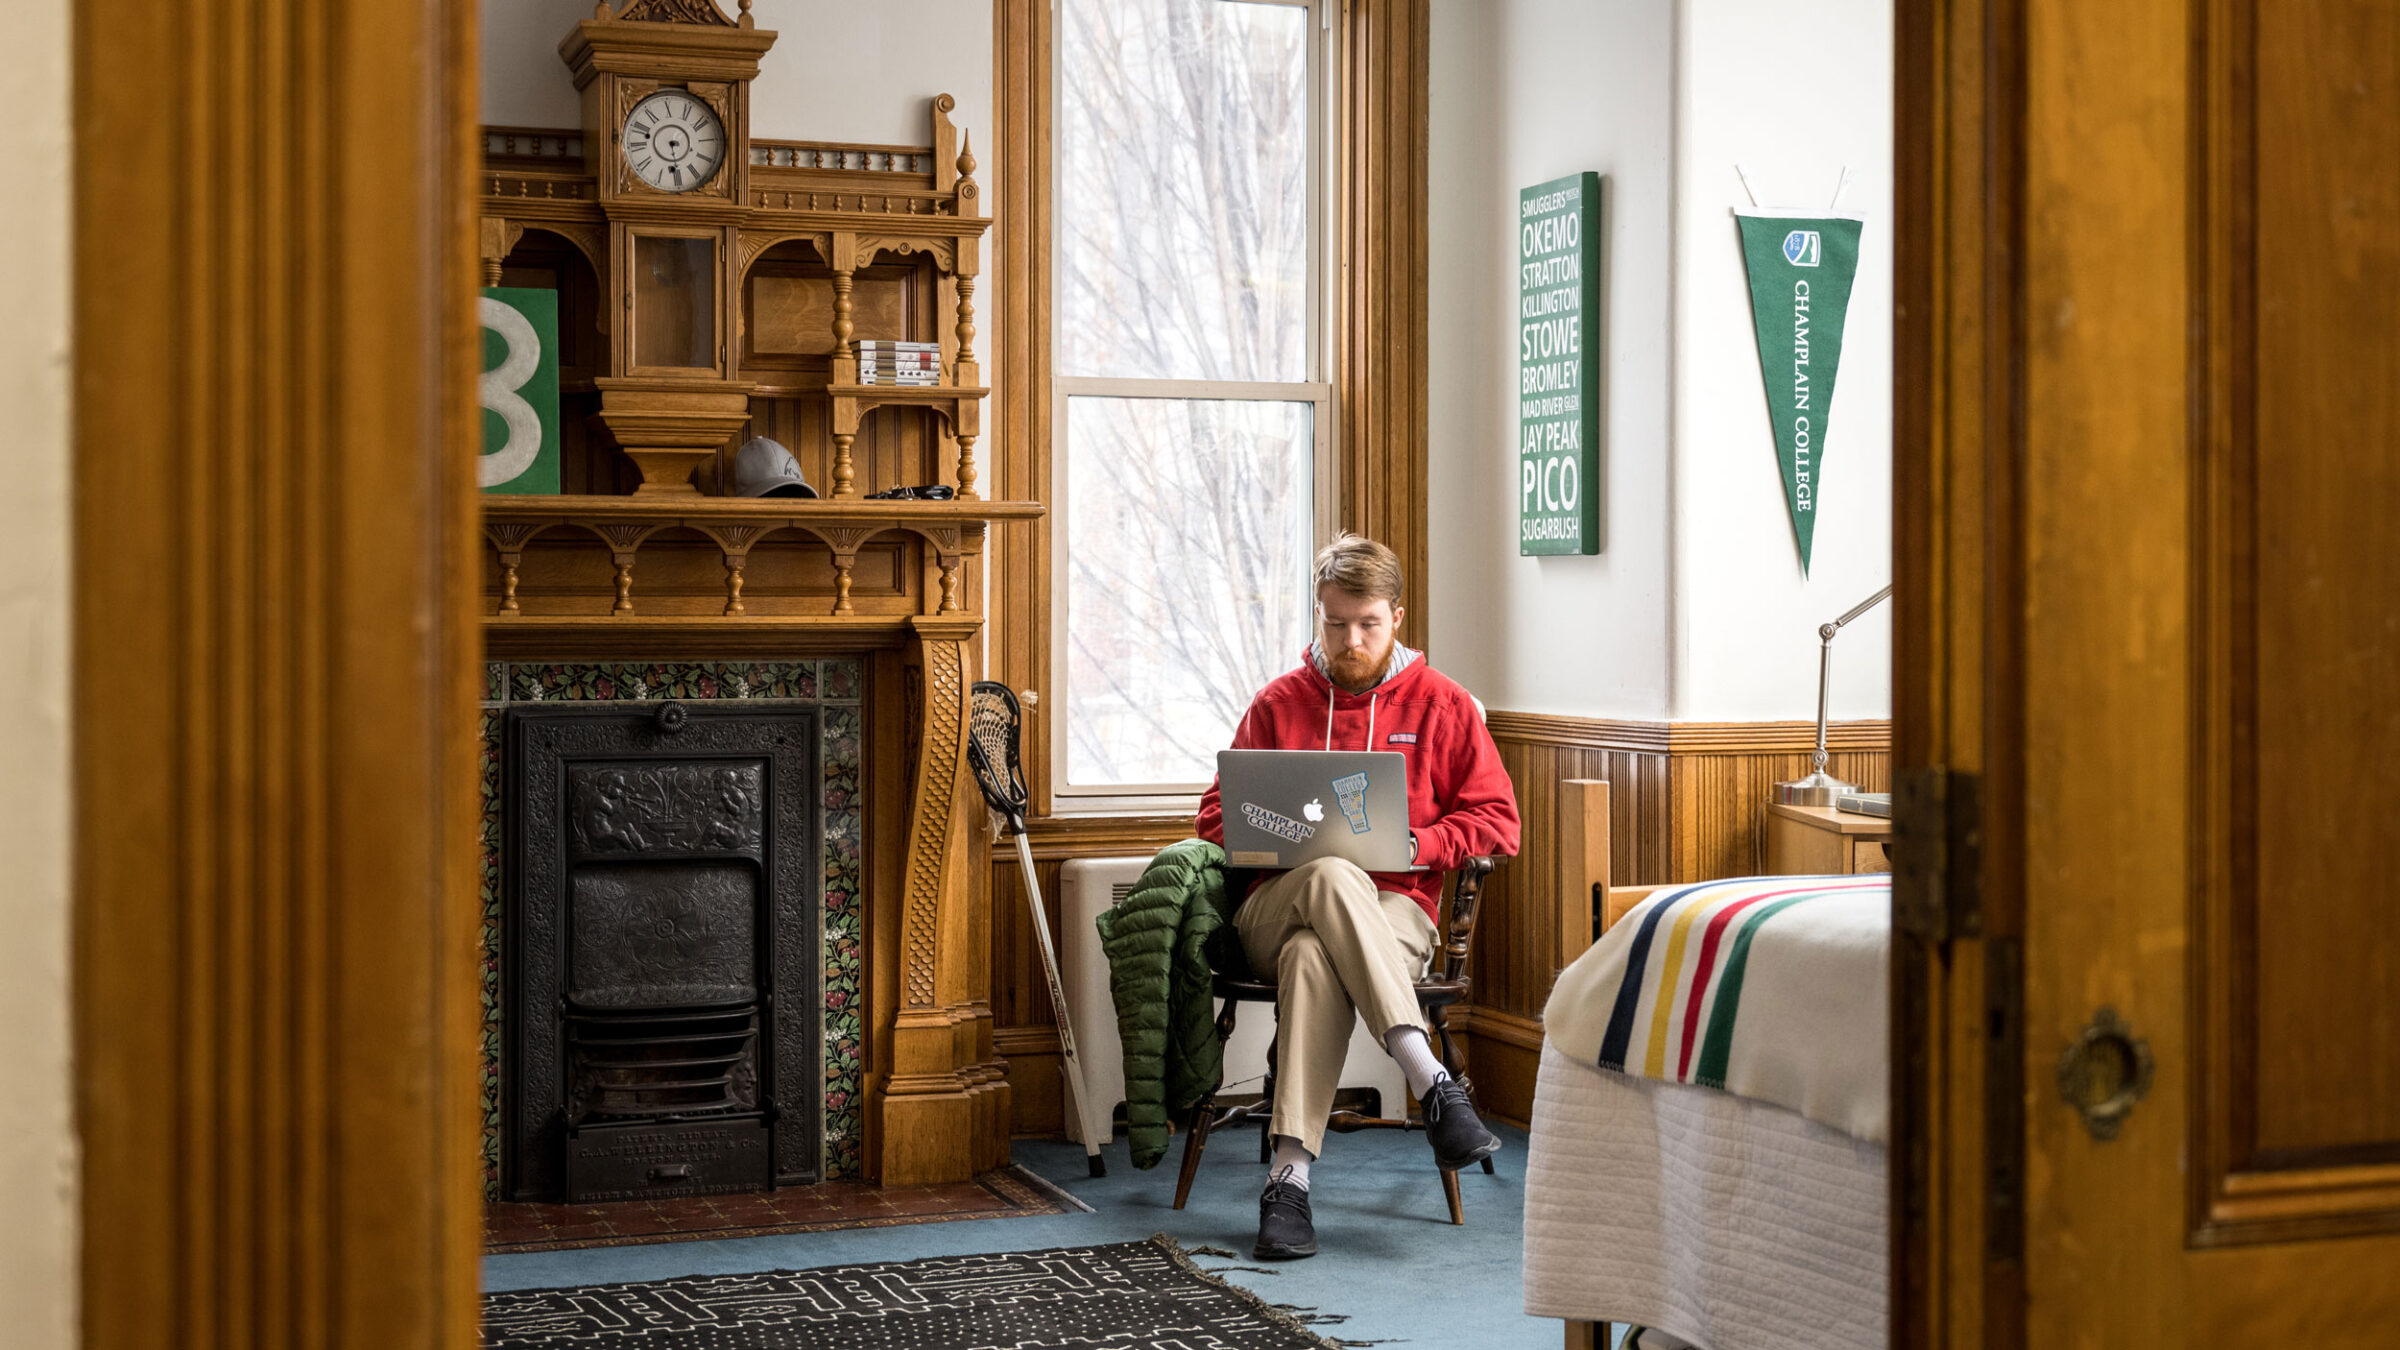 A student studies in his stately, dorm room, which includes an elaborate fireplace.